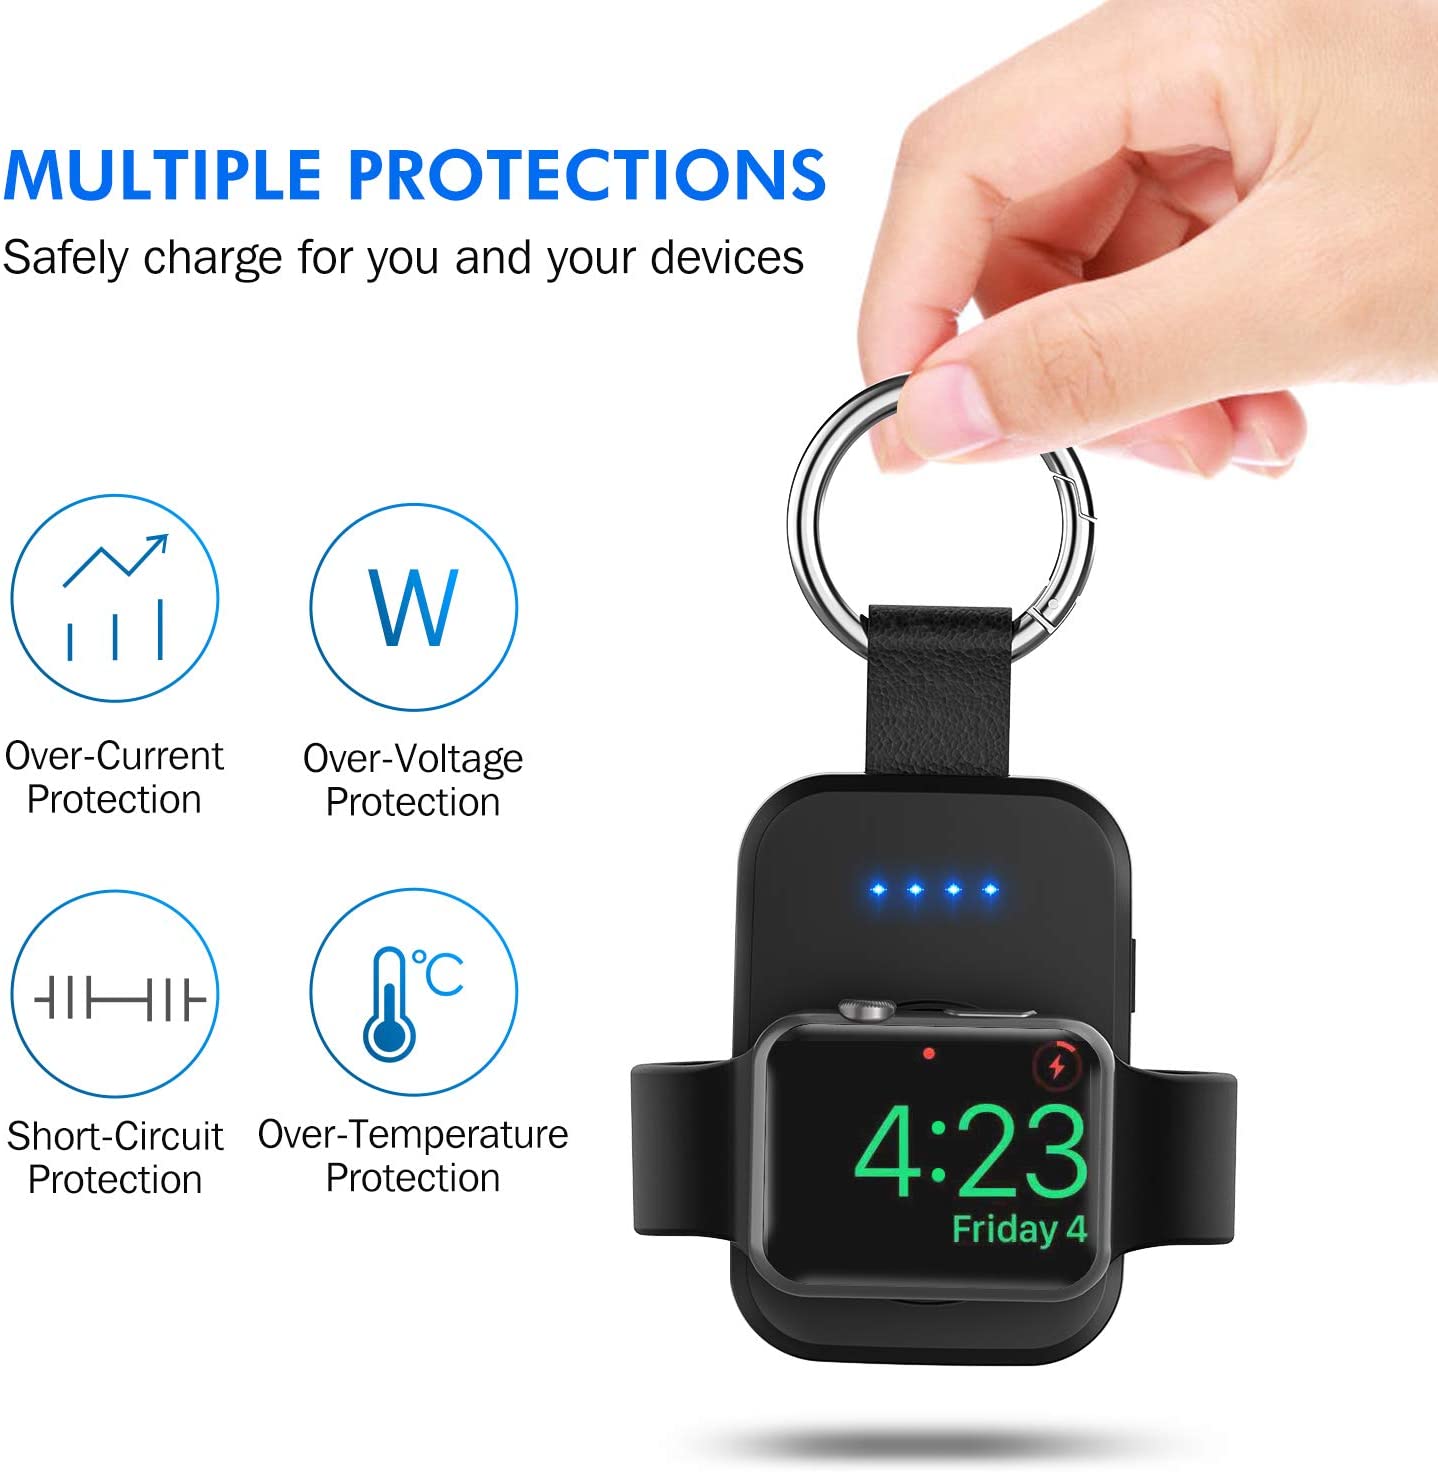 Portable Wireless Charger for Apple Watch